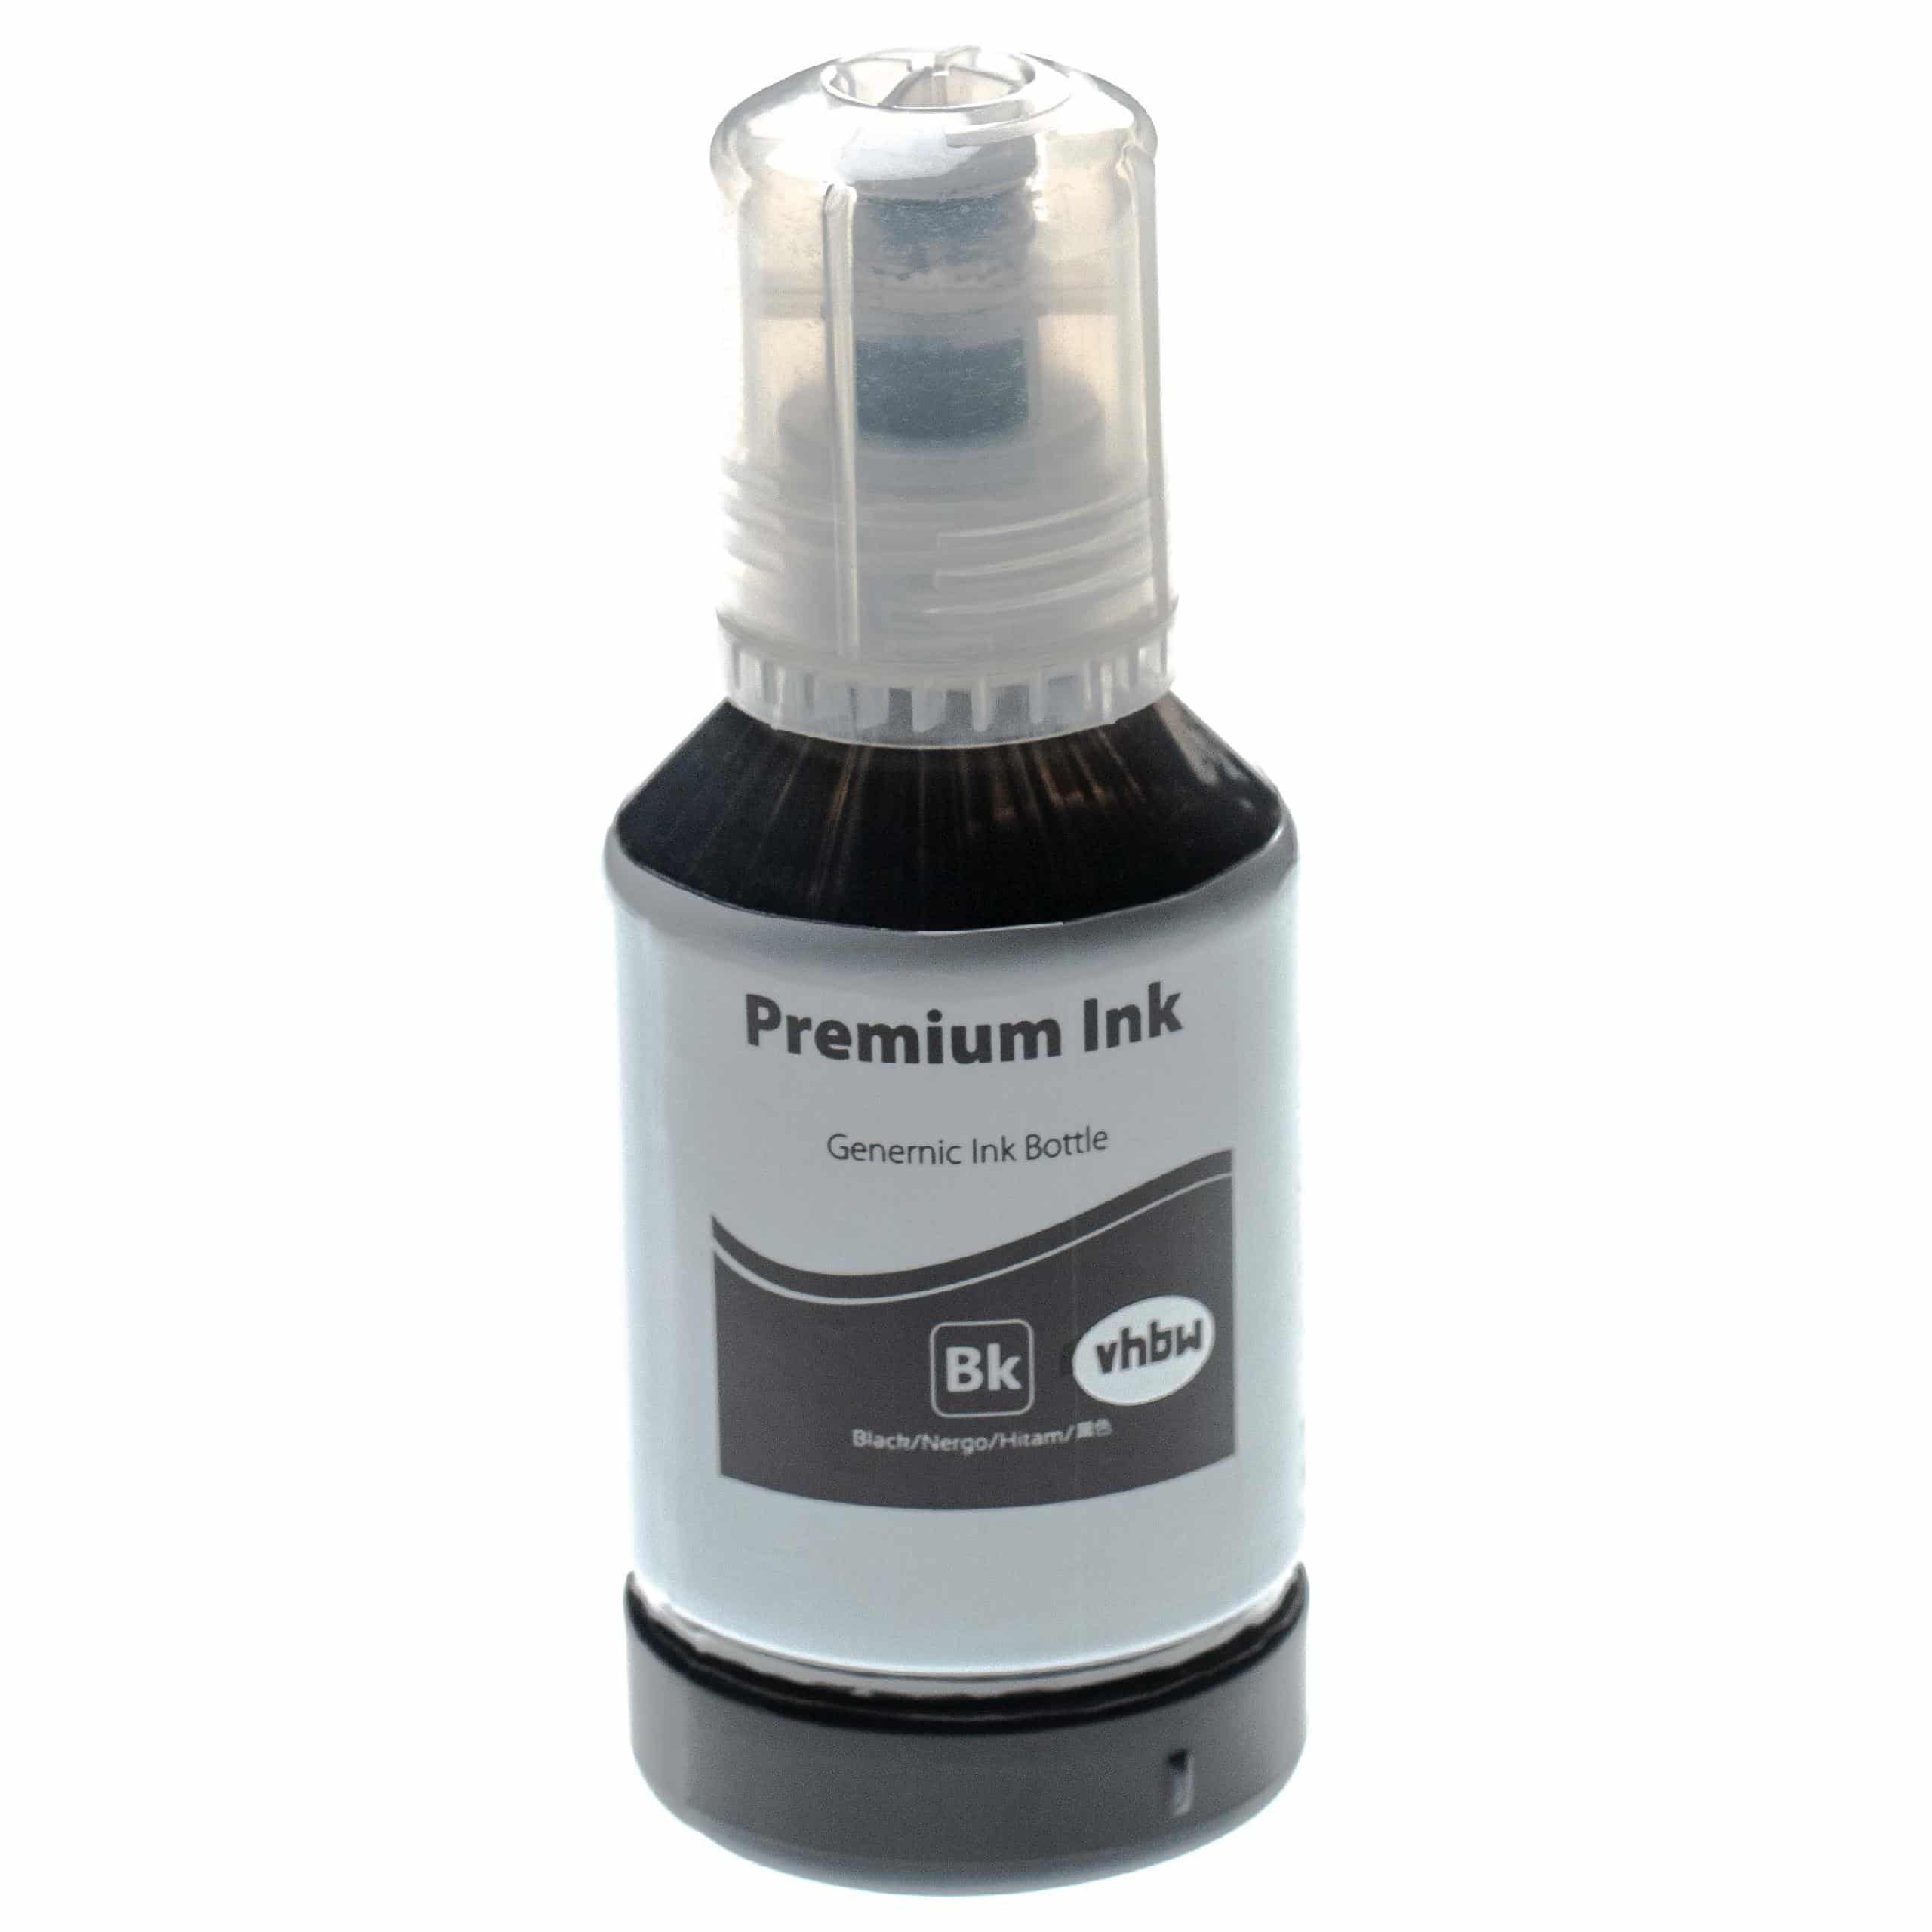 Refill Ink Black replaces Epson C13T03R140, 102 black pigment ink for Epson Printer etc. - Pigmented, 127 ml